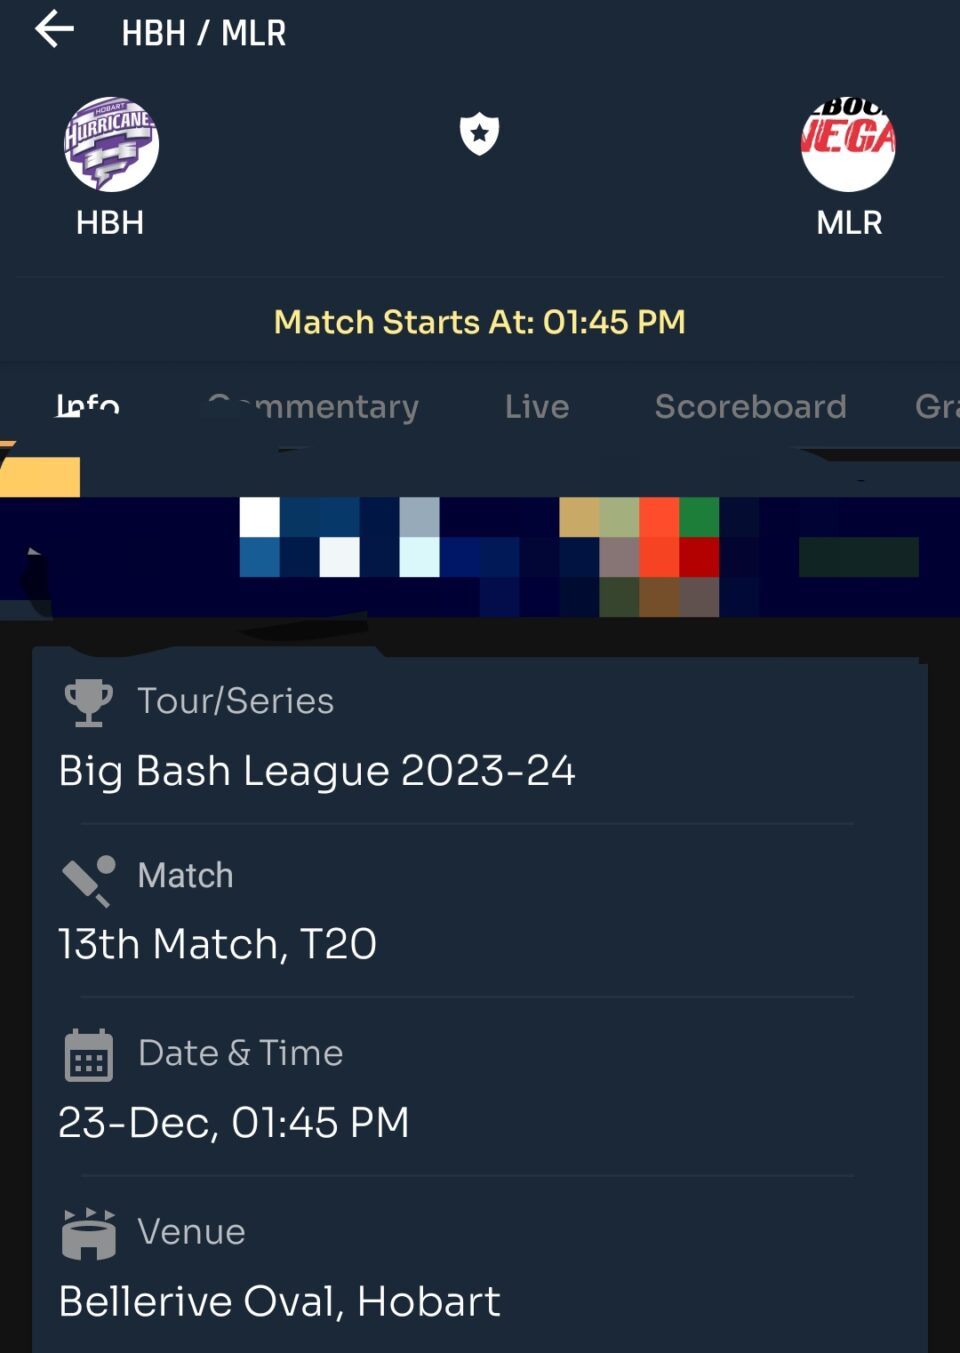 Today BBL Match Number 13 Prediction | Melbourne Renegades vs Hobart Hurricanes | Toss and Match Analysis | Pitch & Weather Reports | Probable 11